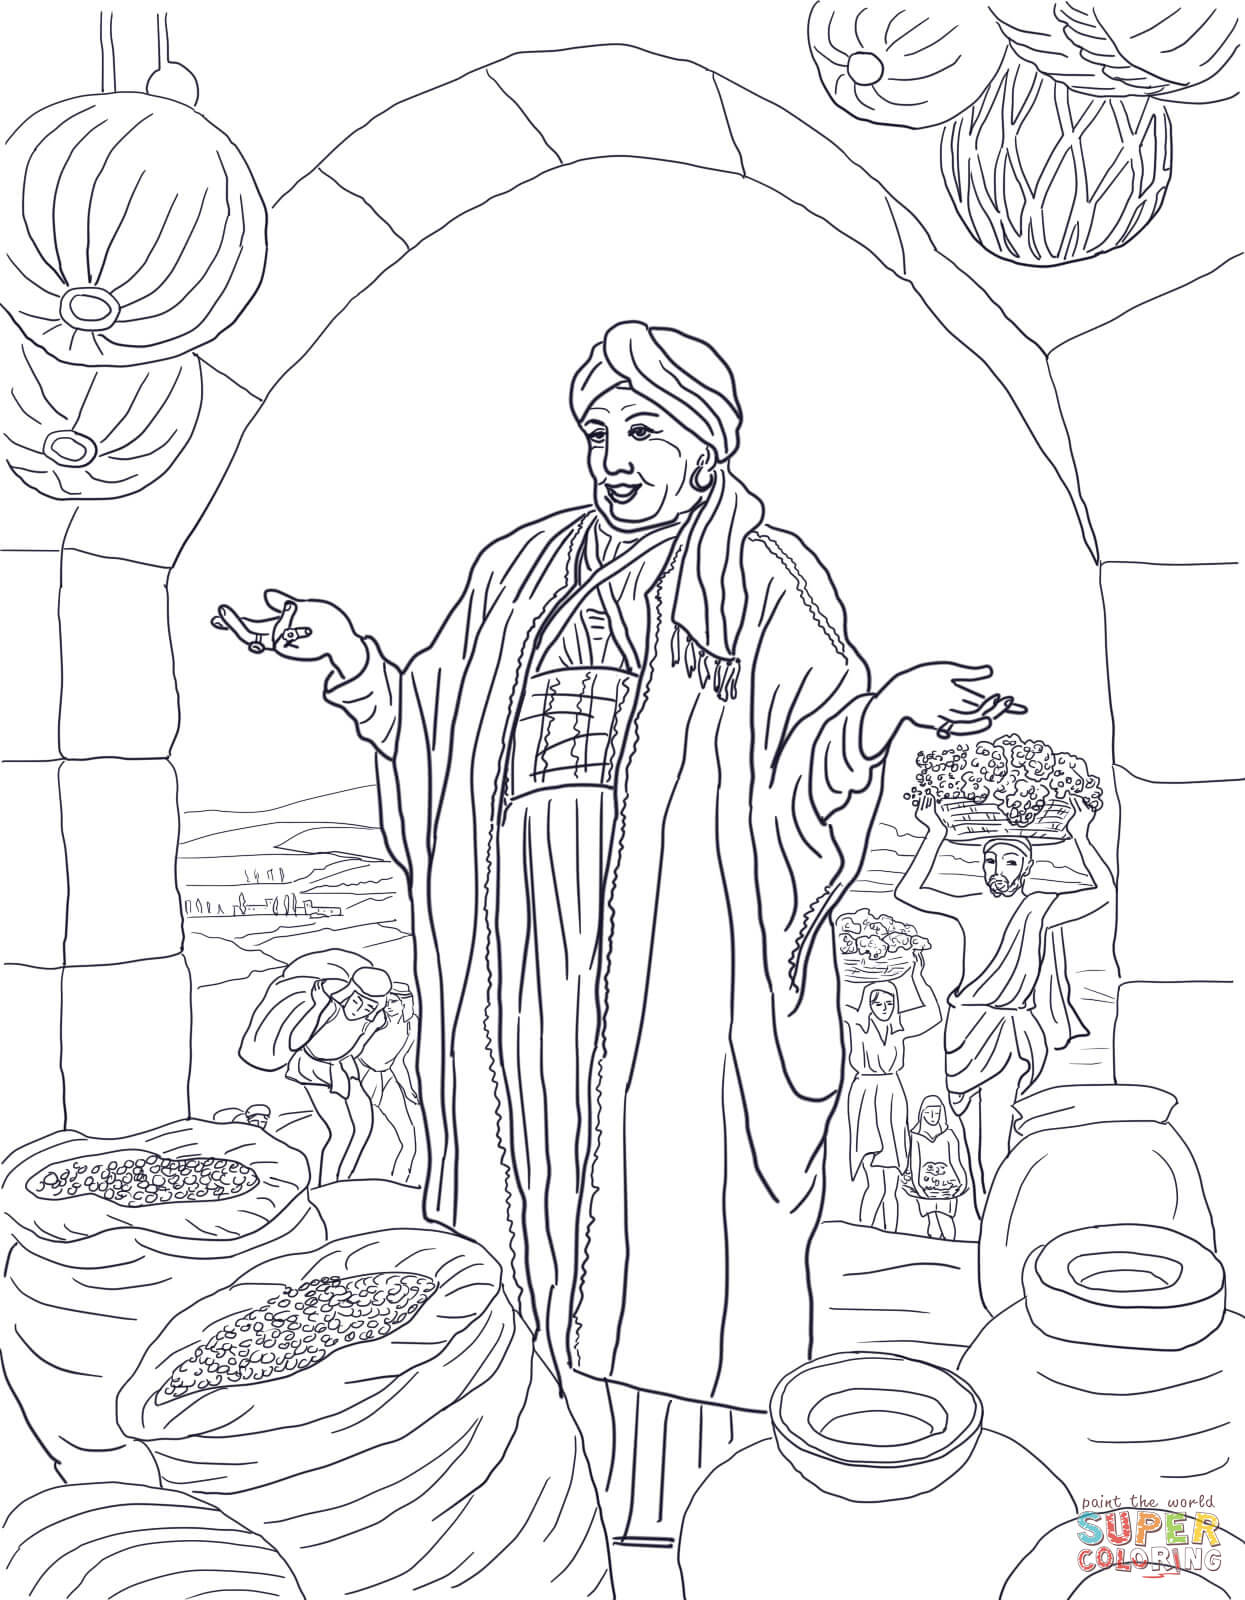 Parable of the rich fool coloring page free printable coloring pages